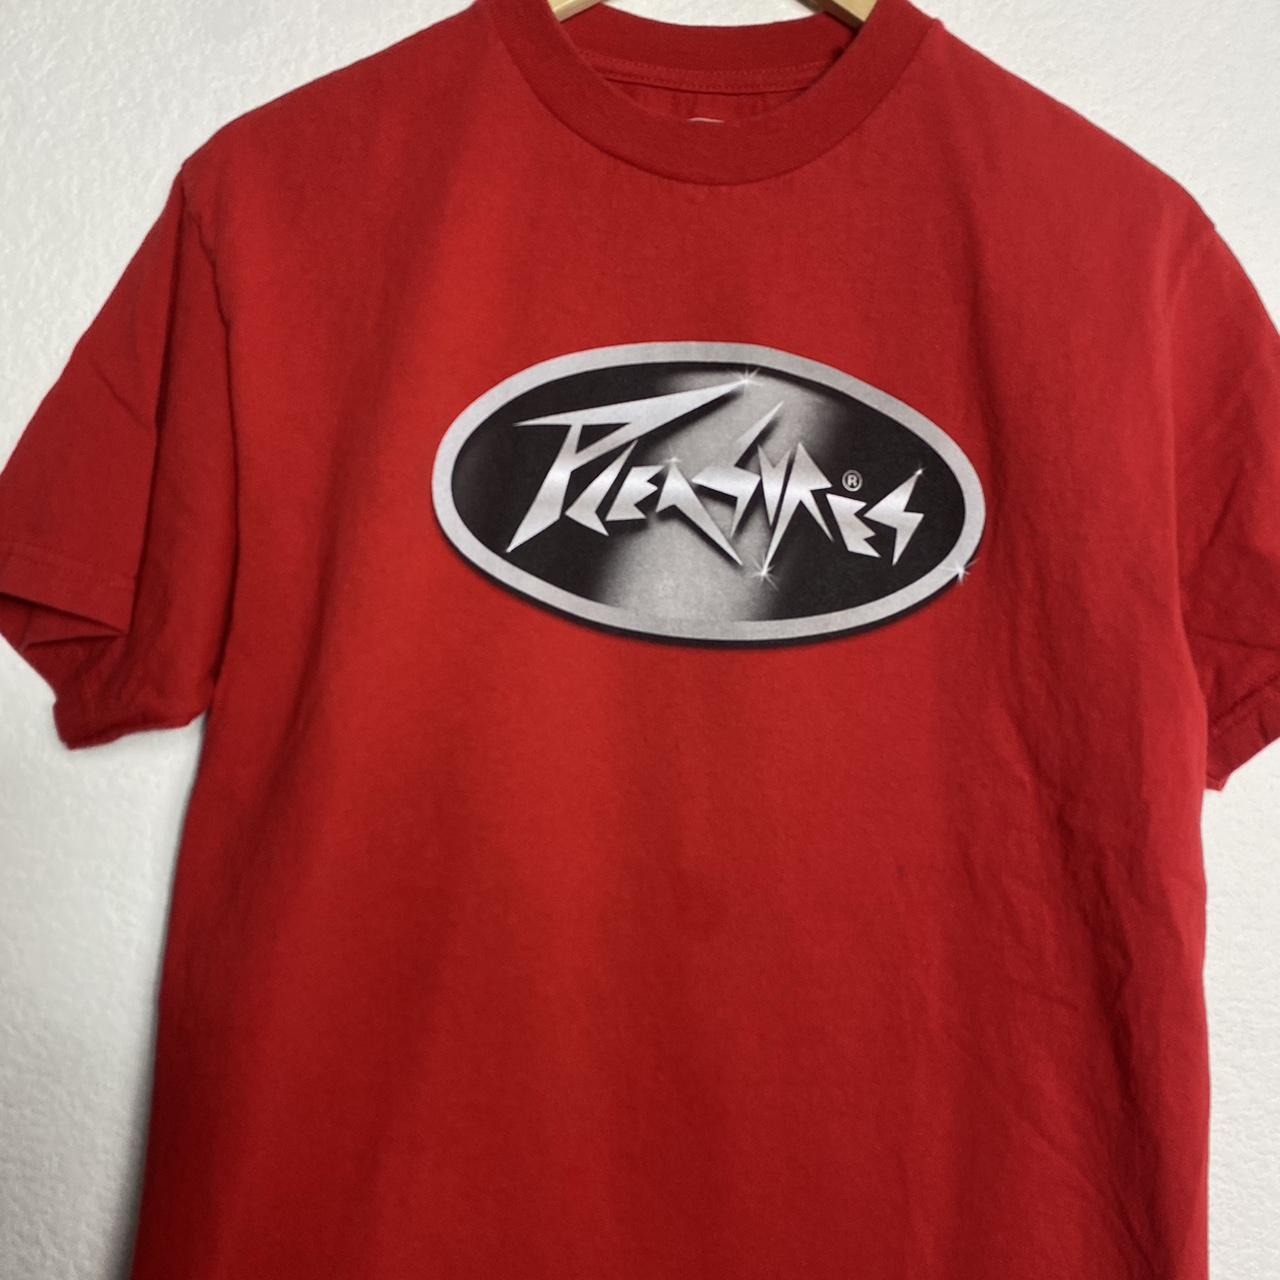 Pleasures Men's Red and Burgundy T-shirt